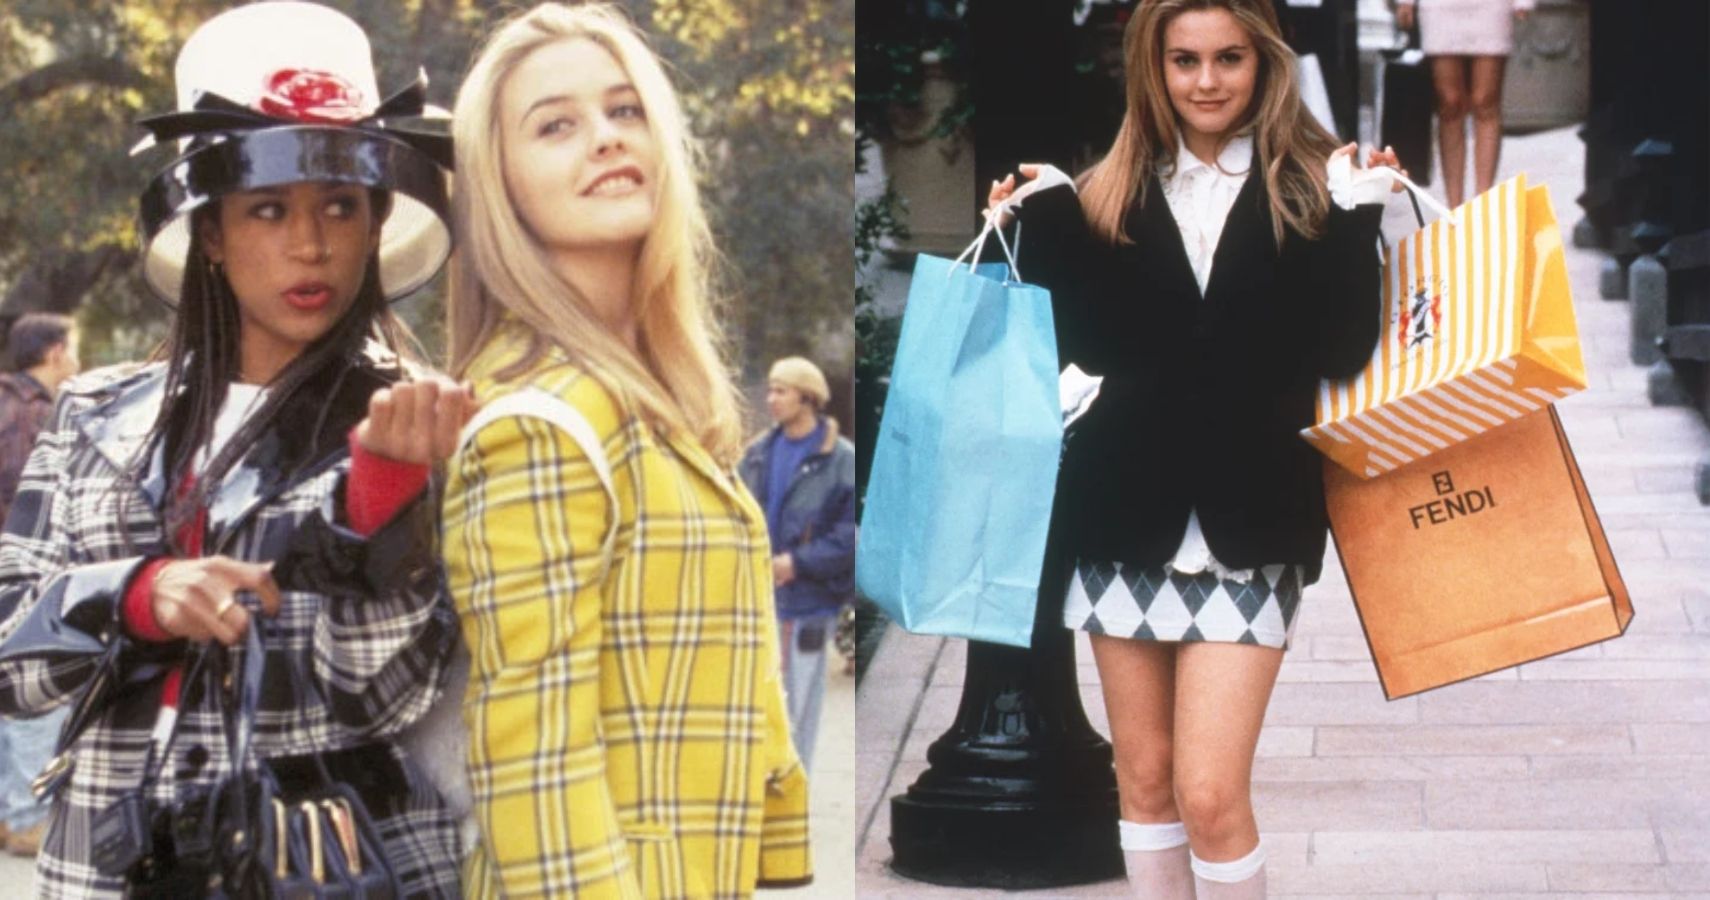 A split image features Dionne and Cher in their plaid suits and Cher shopping in Clueless